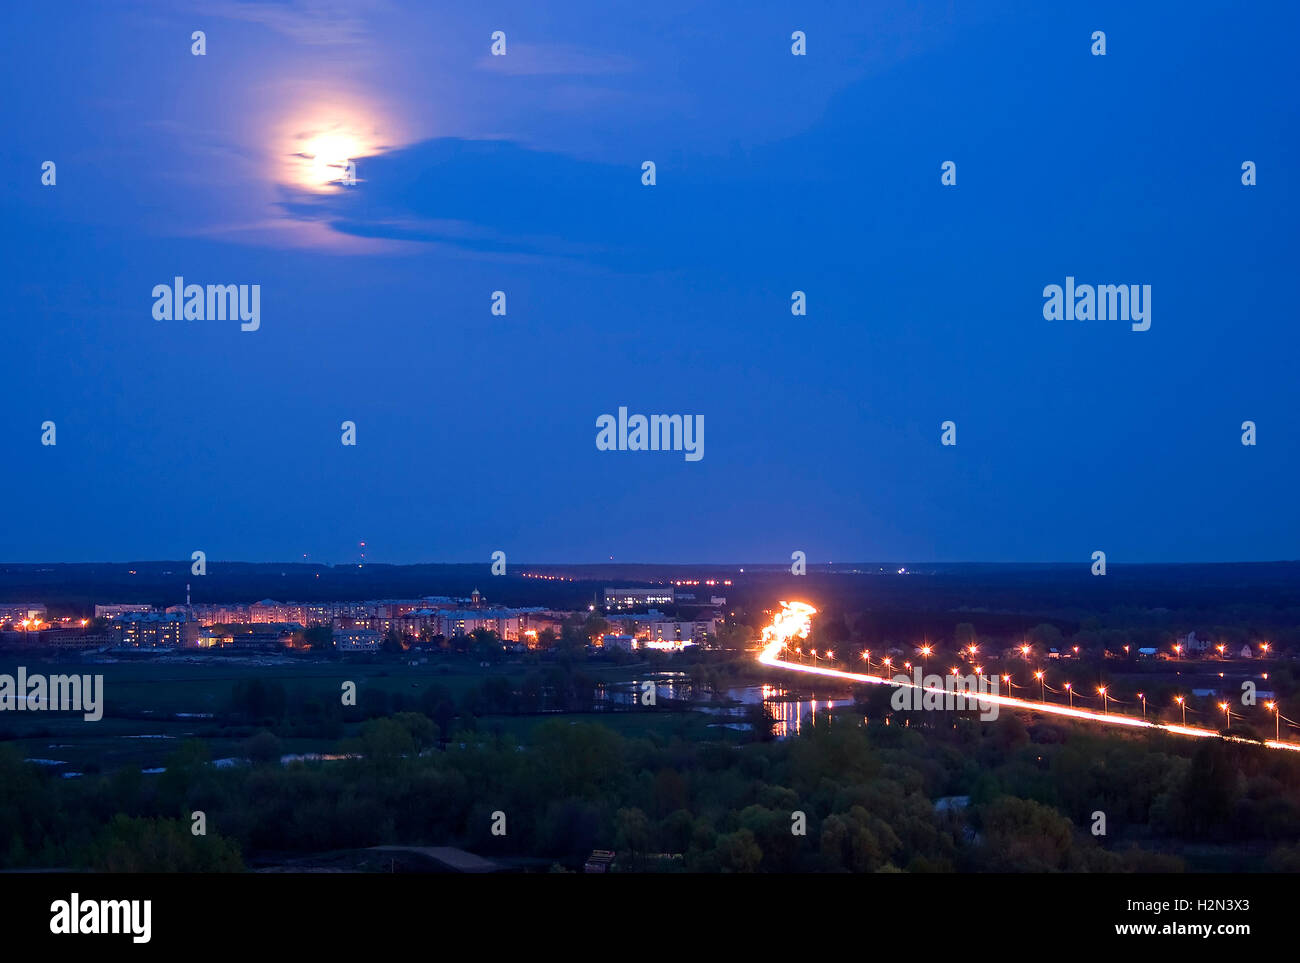 Night or evening russian landscape: river, road, bridge, lanterns, lamps, forest as a foreground; horizon, sky, clouds and Moon Stock Photo